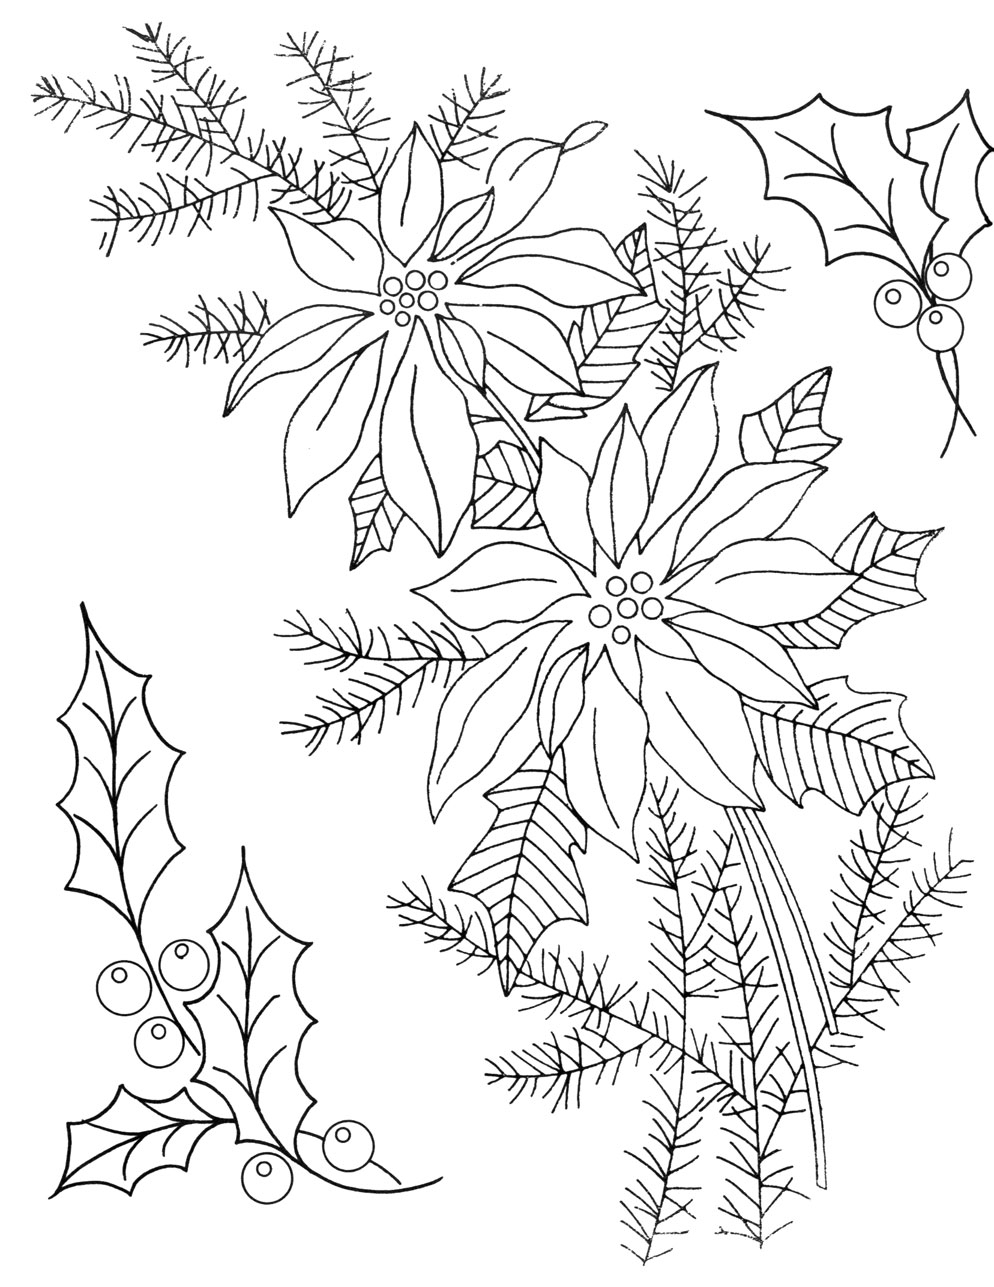 Free Printable Embroidery Patterns By Hand Free Printable Embroidery Patterns Hand 108 Images In